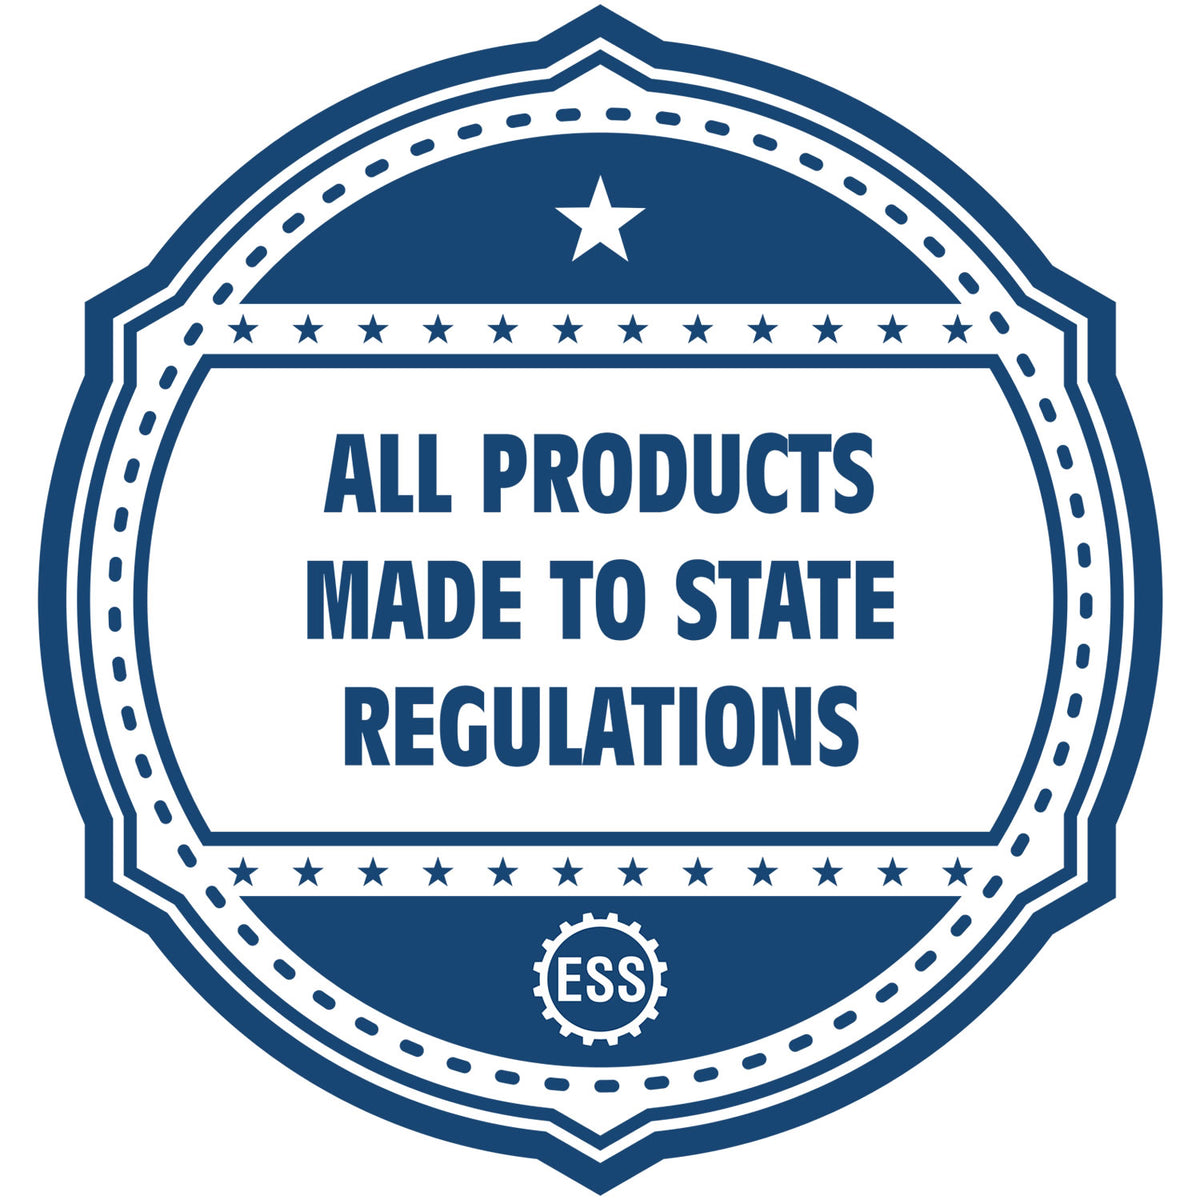 An icon or badge element for the Soft Arkansas Professional Engineer Seal showing that this product is made in compliance with state regulations.